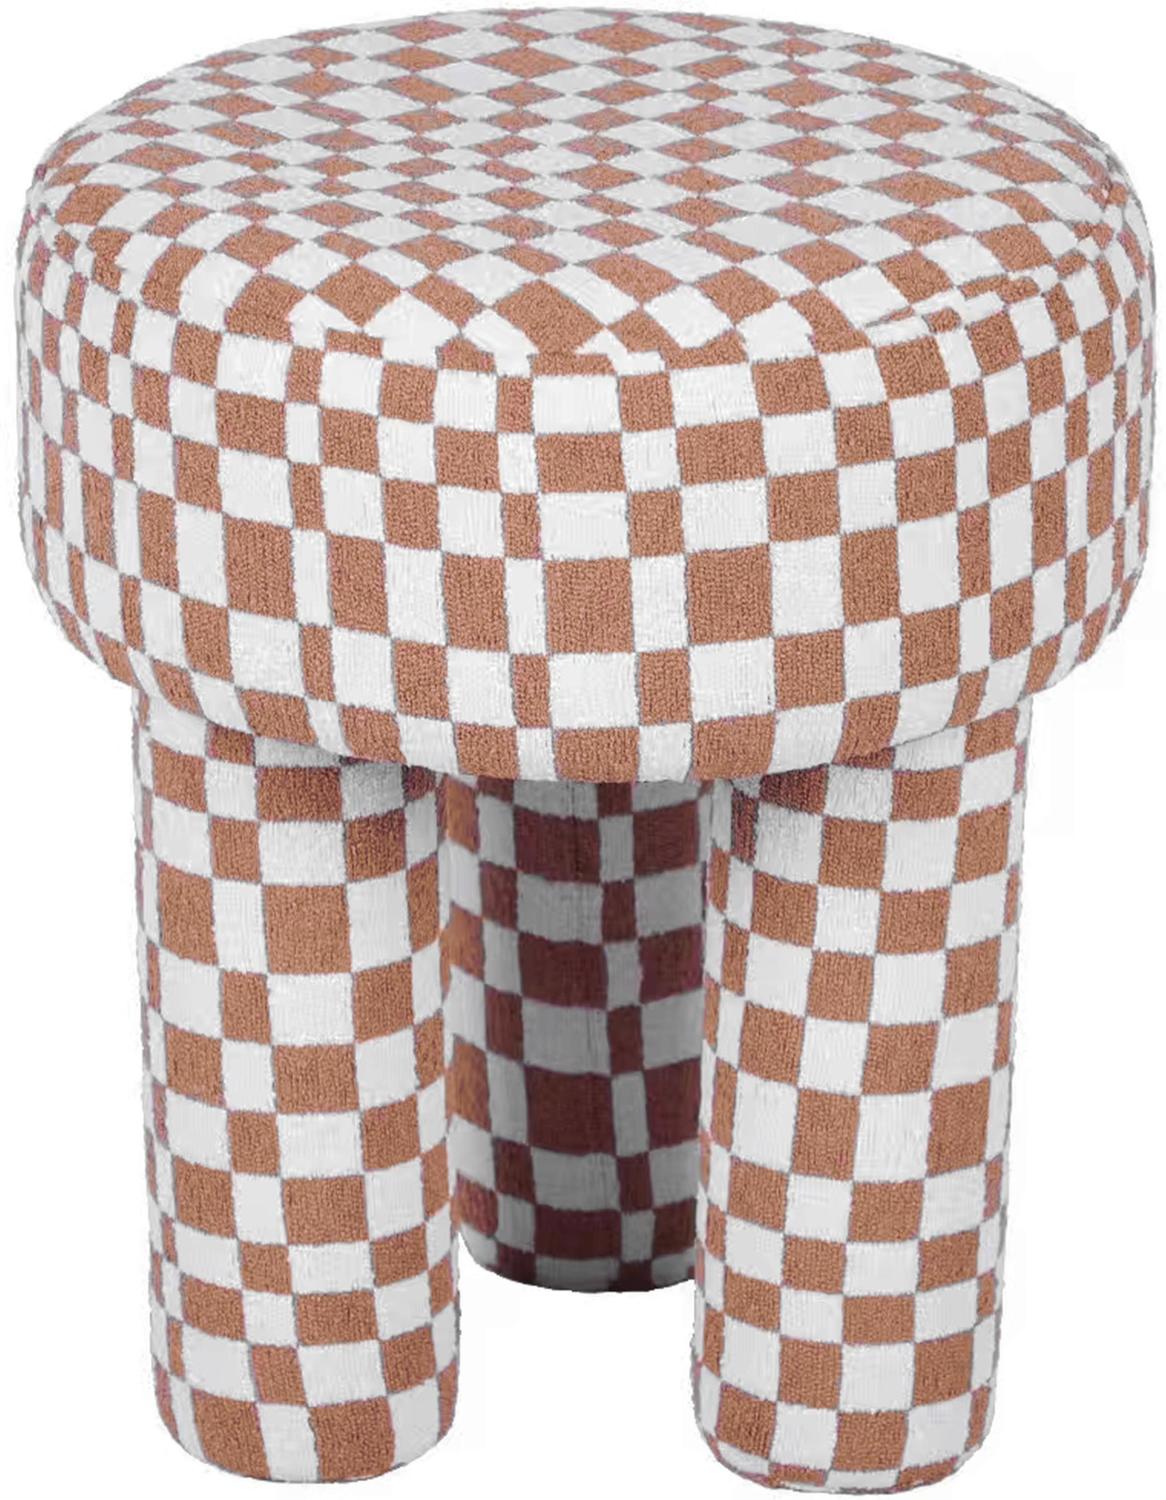 patterned club chair Contemporary Design Furniture Ottomans Brown